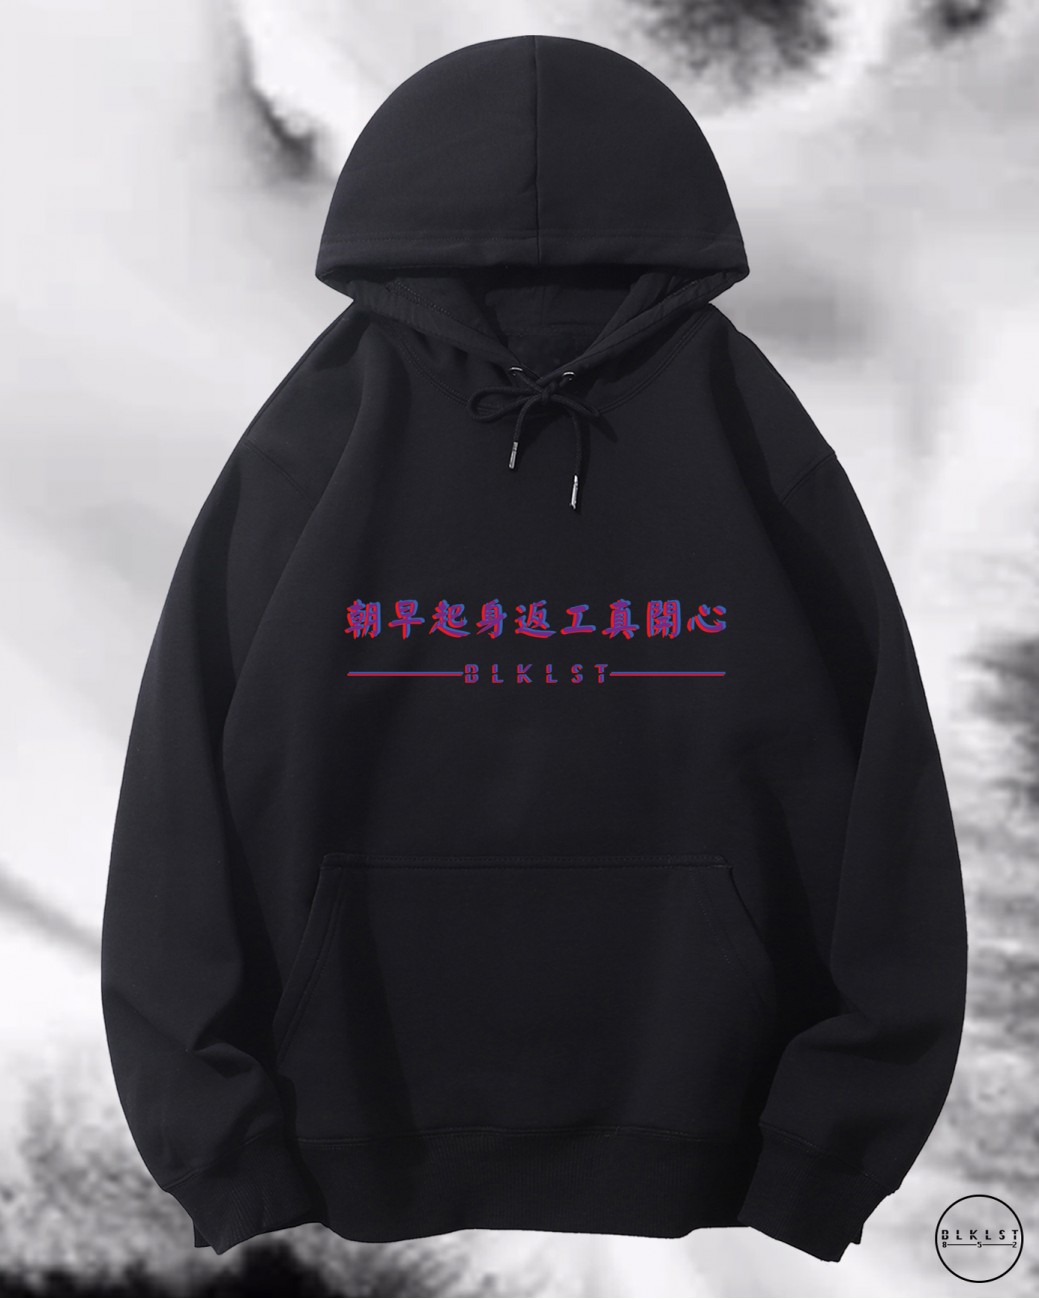 "HAPPY TO WORK IN MORNING" HOODIE